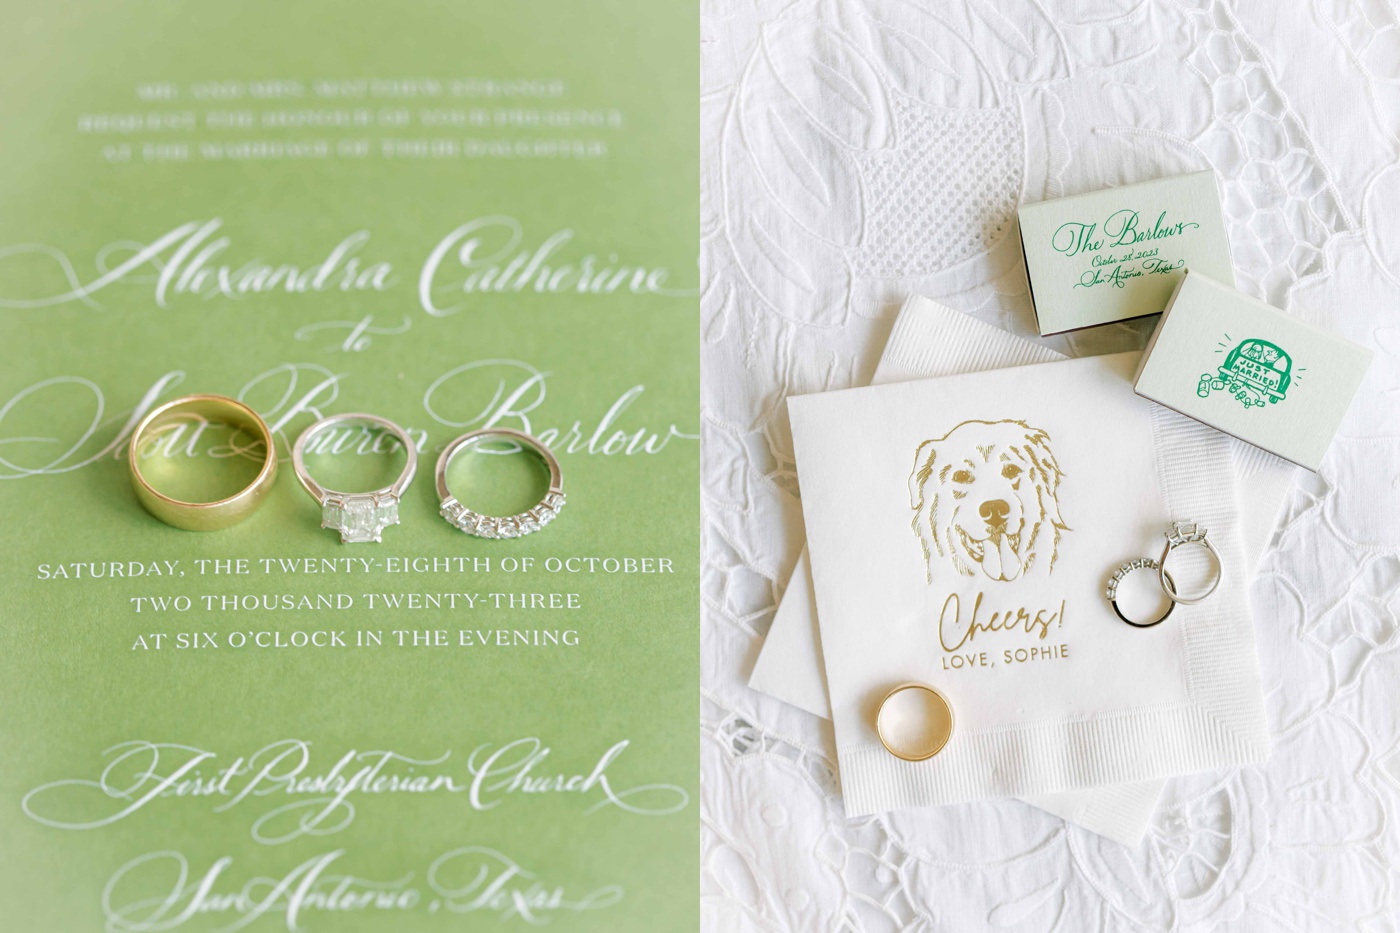 Flatlay with a custom pet cocktail napkin and wedding rings